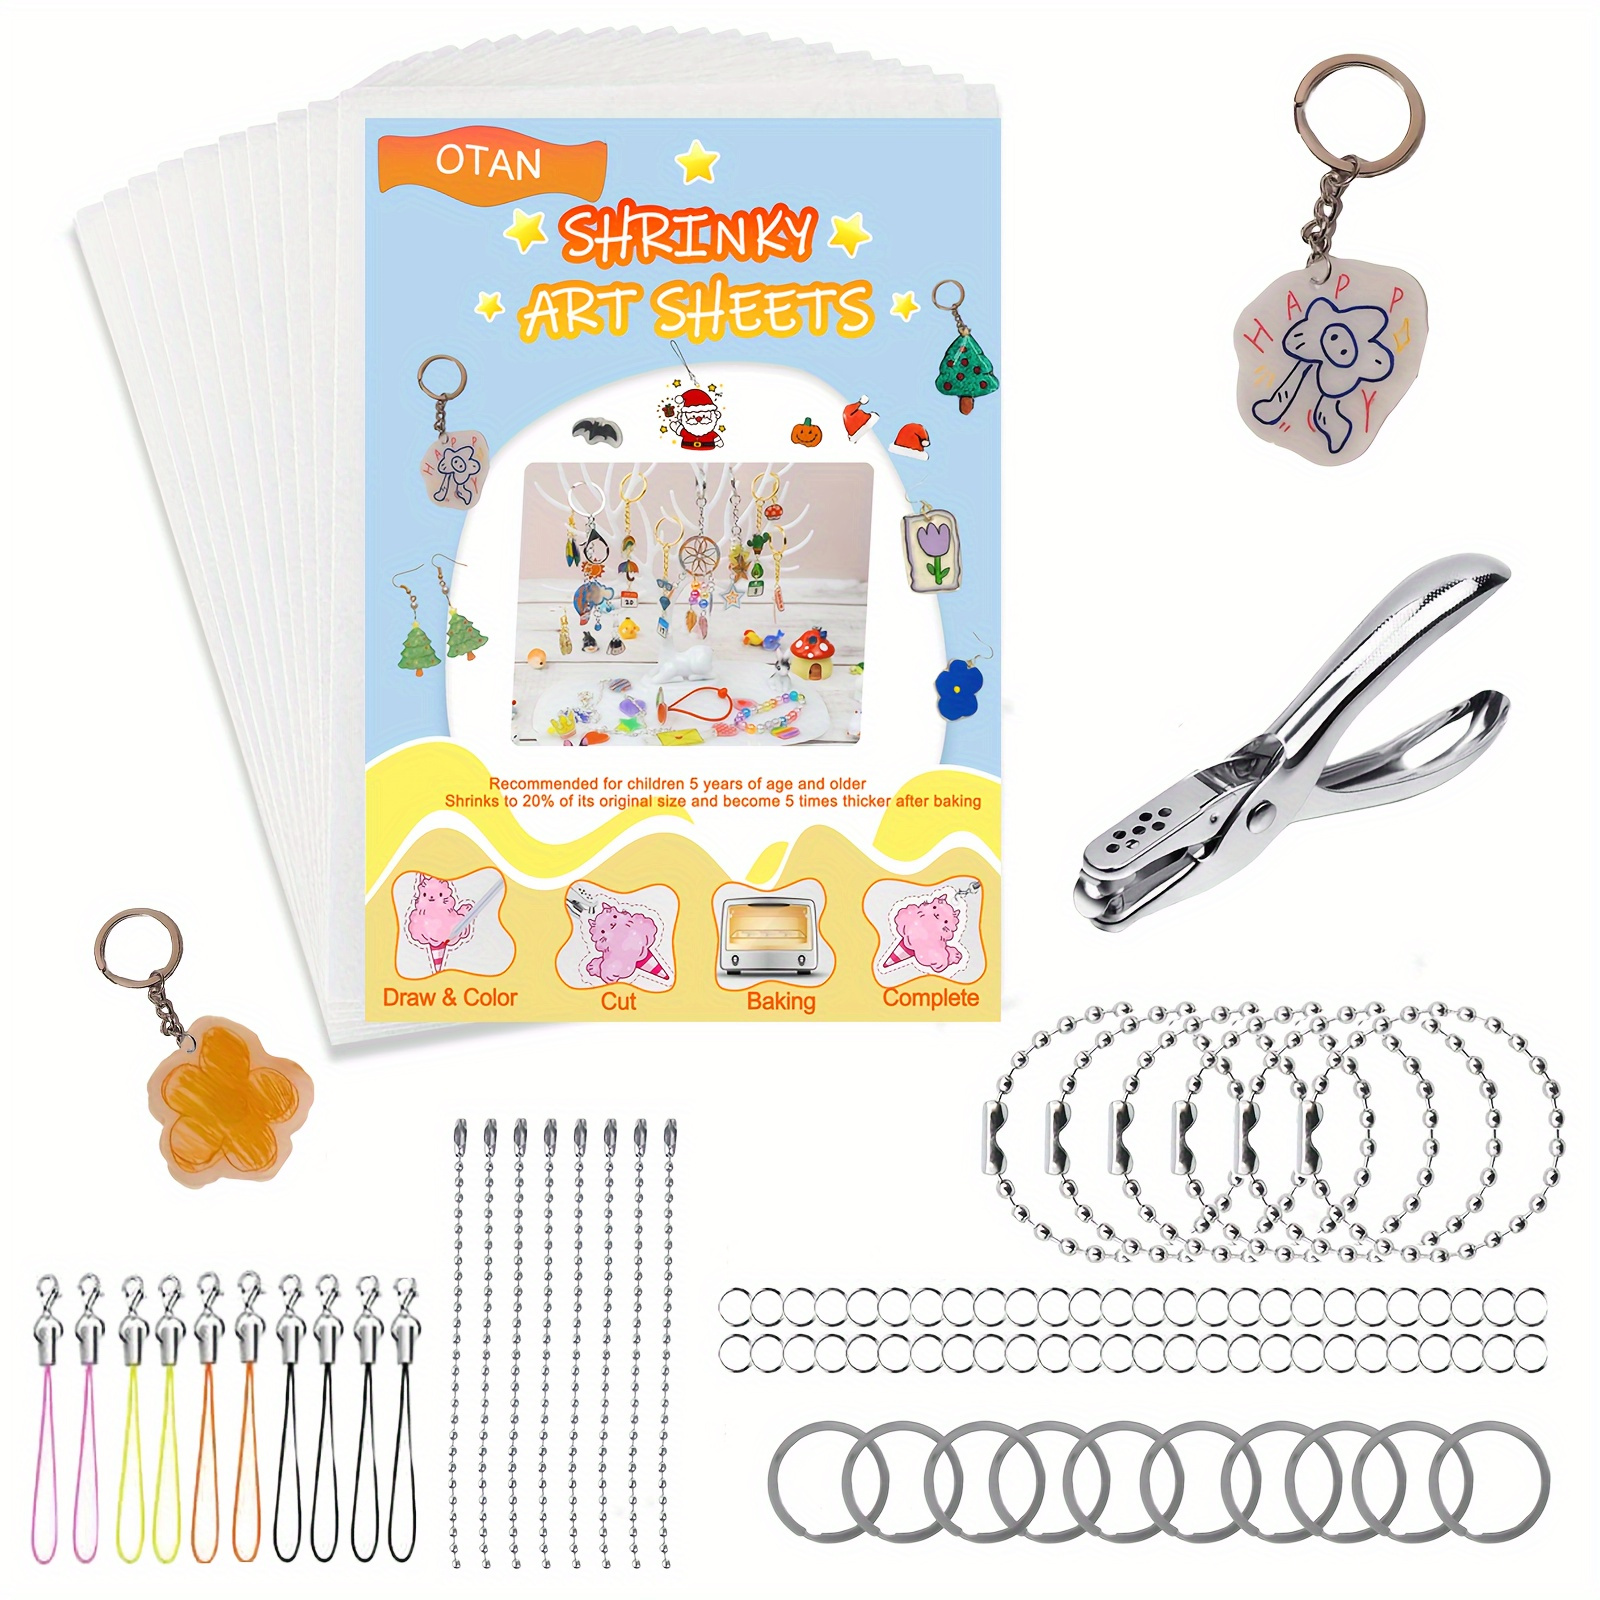 

Shrink Plastic Sheets Kit For Shrinky Dink Craft Making, 122pcs Shrink Art Kit Include 16 Pcs Shrink Film Paper With 106pcs Keychains, Hole Punch Accessories For Creative Craft